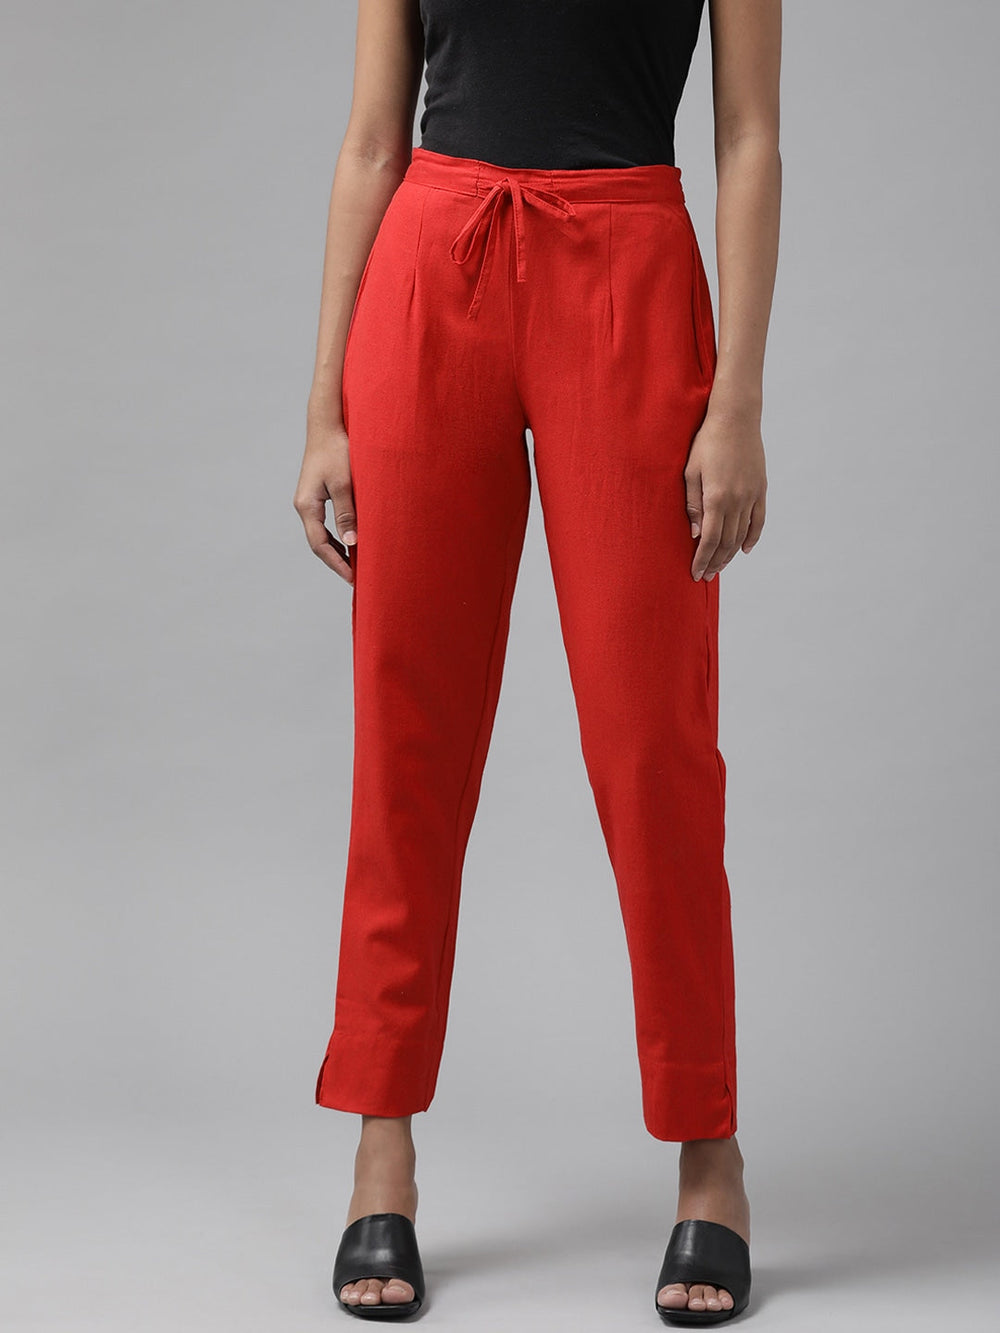 Red Cotton Fit Trousers-Yufta Store-4206PNTRDS